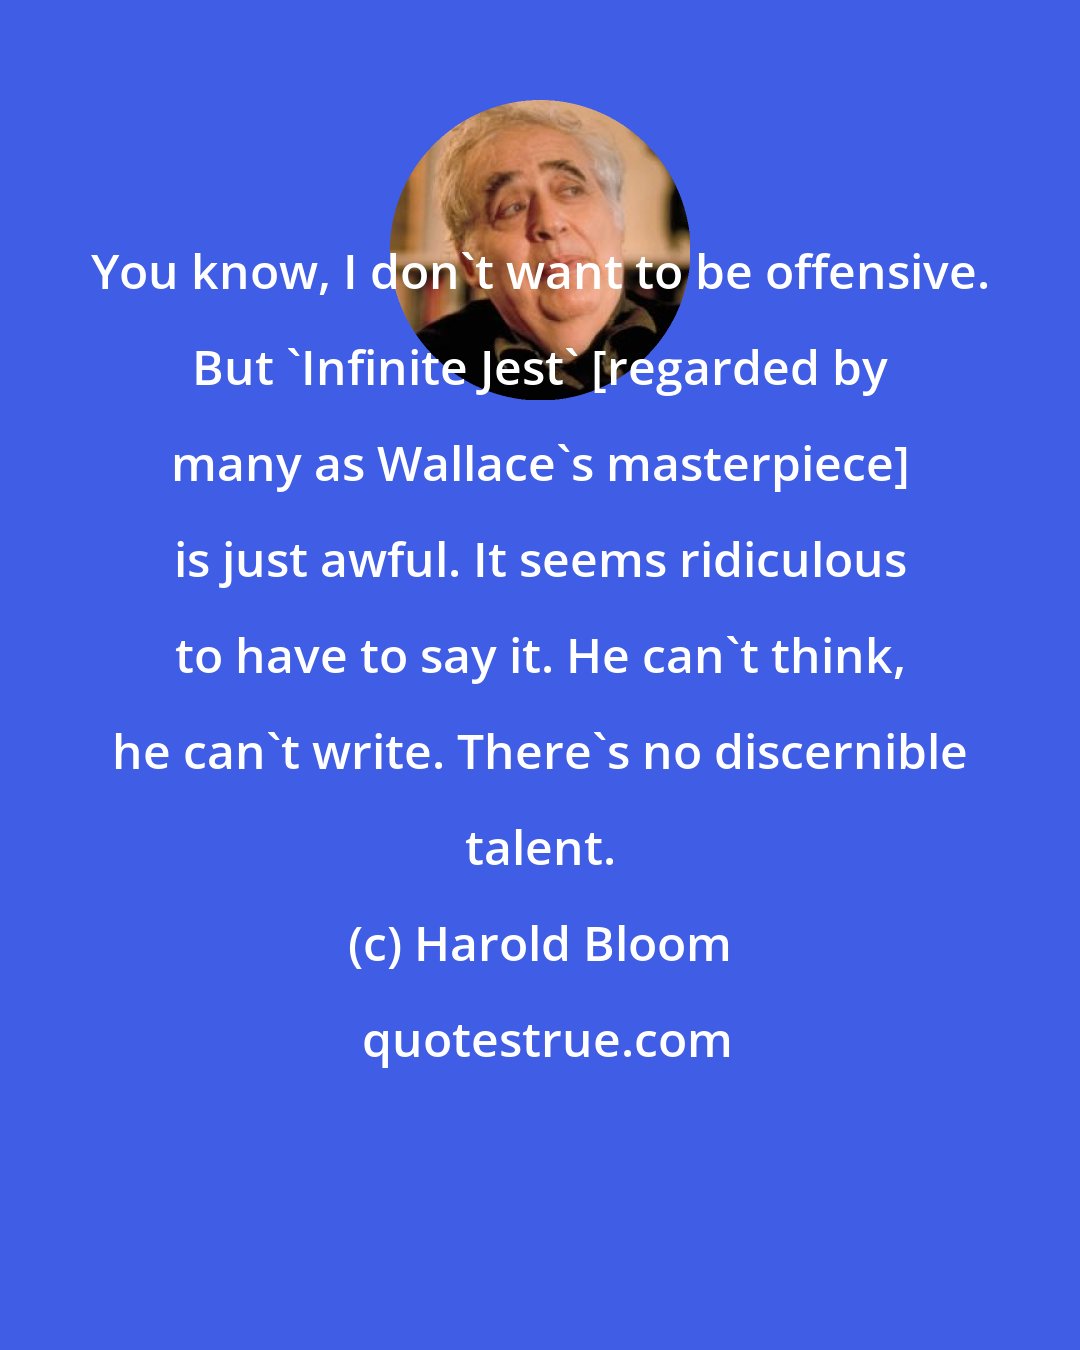 Harold Bloom: You know, I don't want to be offensive. But 'Infinite Jest' [regarded by many as Wallace's masterpiece] is just awful. It seems ridiculous to have to say it. He can't think, he can't write. There's no discernible talent.